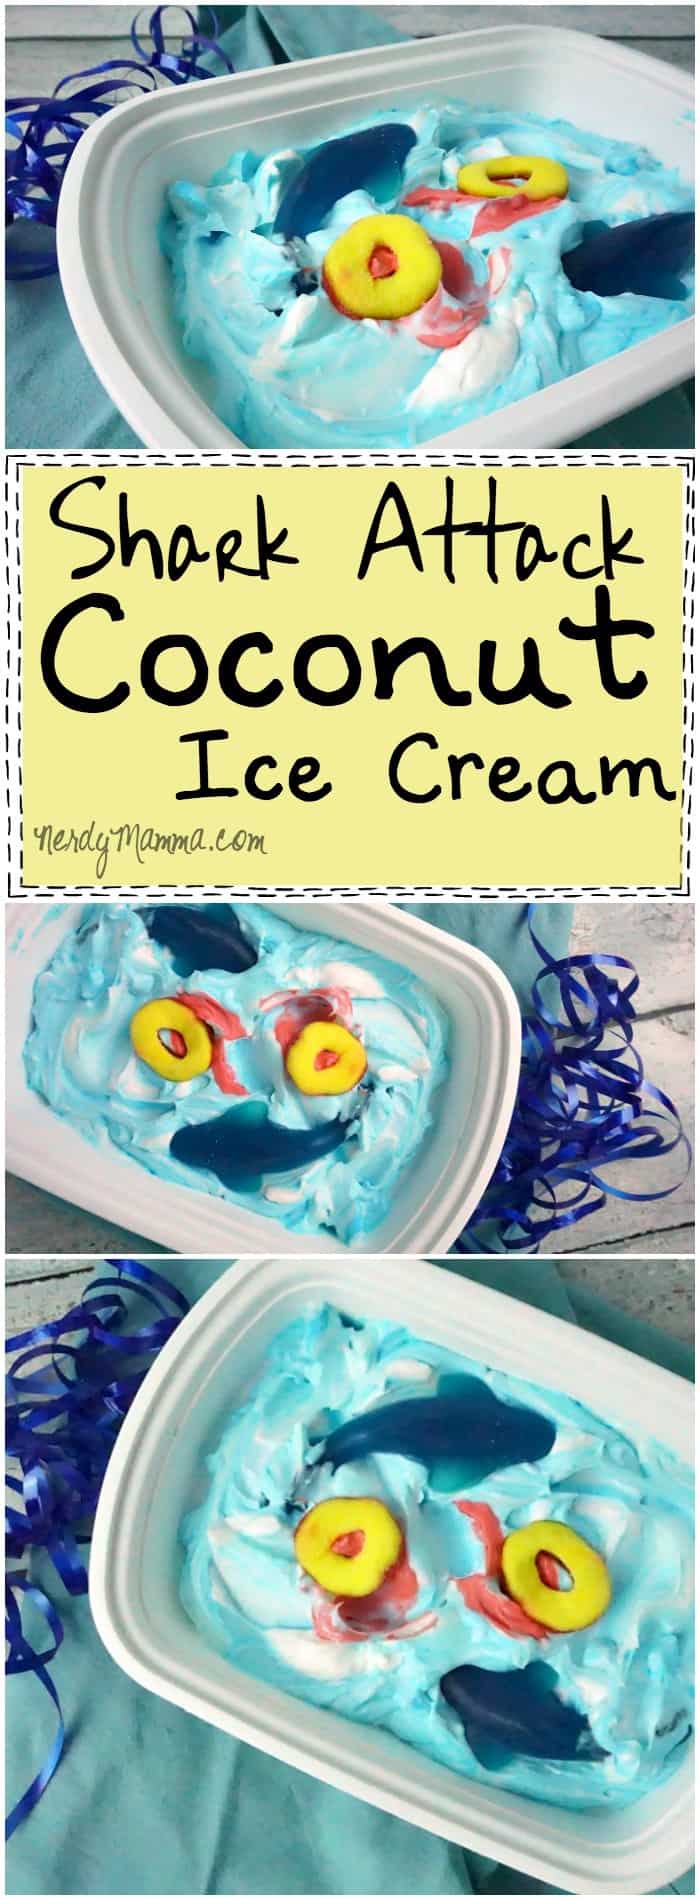 I love this shark attack ice cream. I mean--Coconut Ice Cream. So tasty sounding--and so cute, it's ridiculous. LOL!